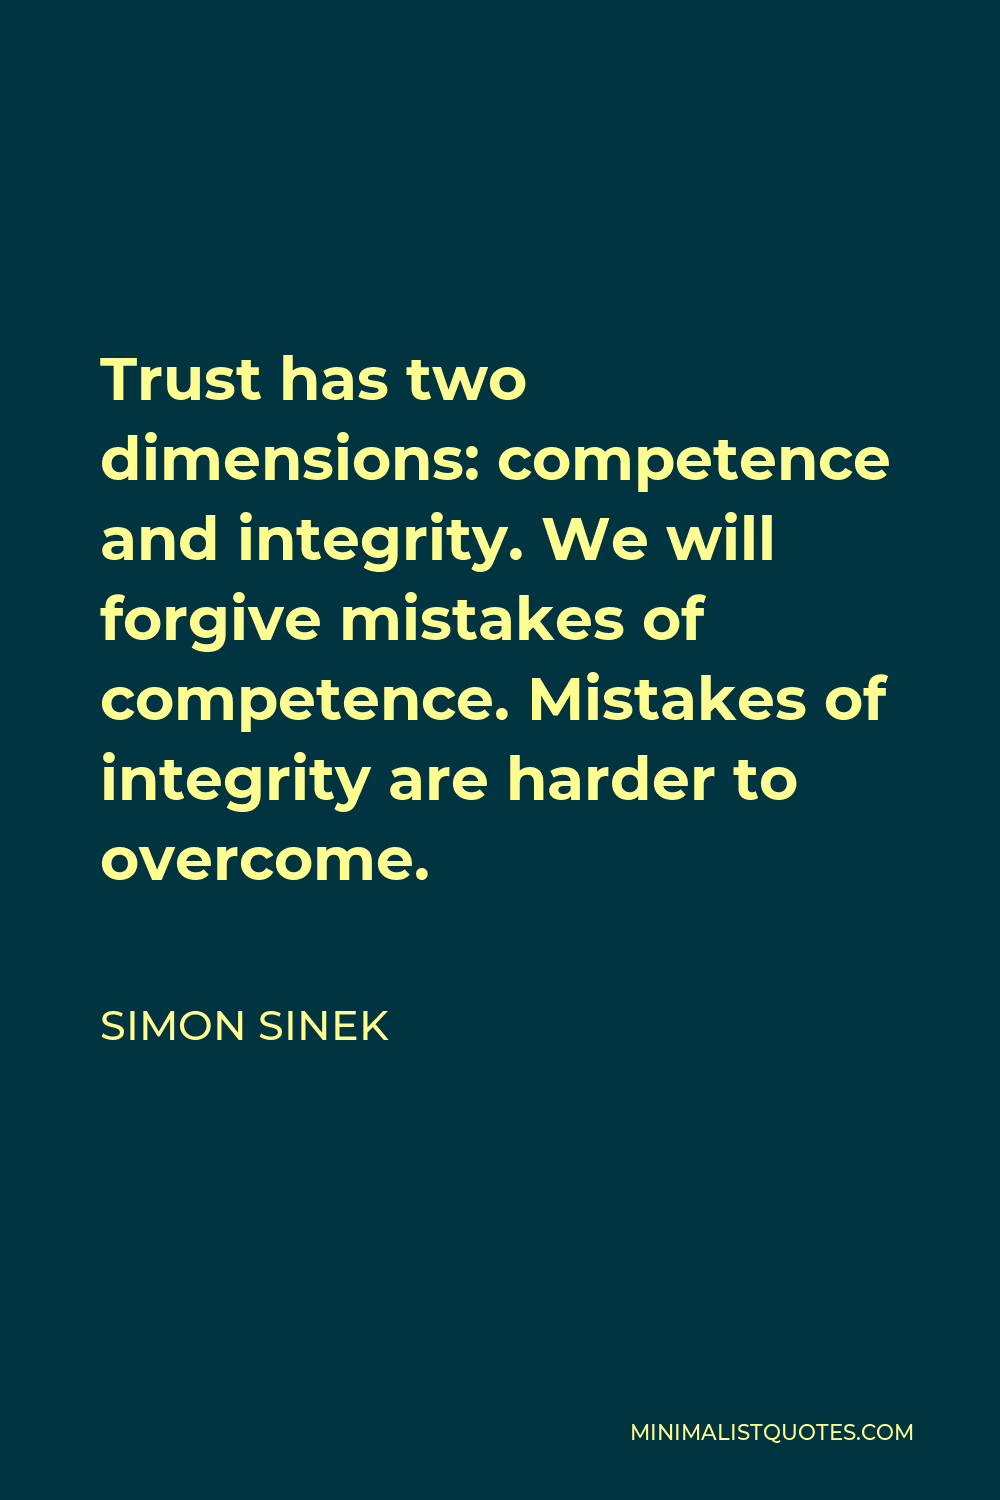 Simon Sinek Quote - Trust has two dimensions: competence and integrity. We will forgive mistakes of competence. Mistakes of integrity are harder to overcome.